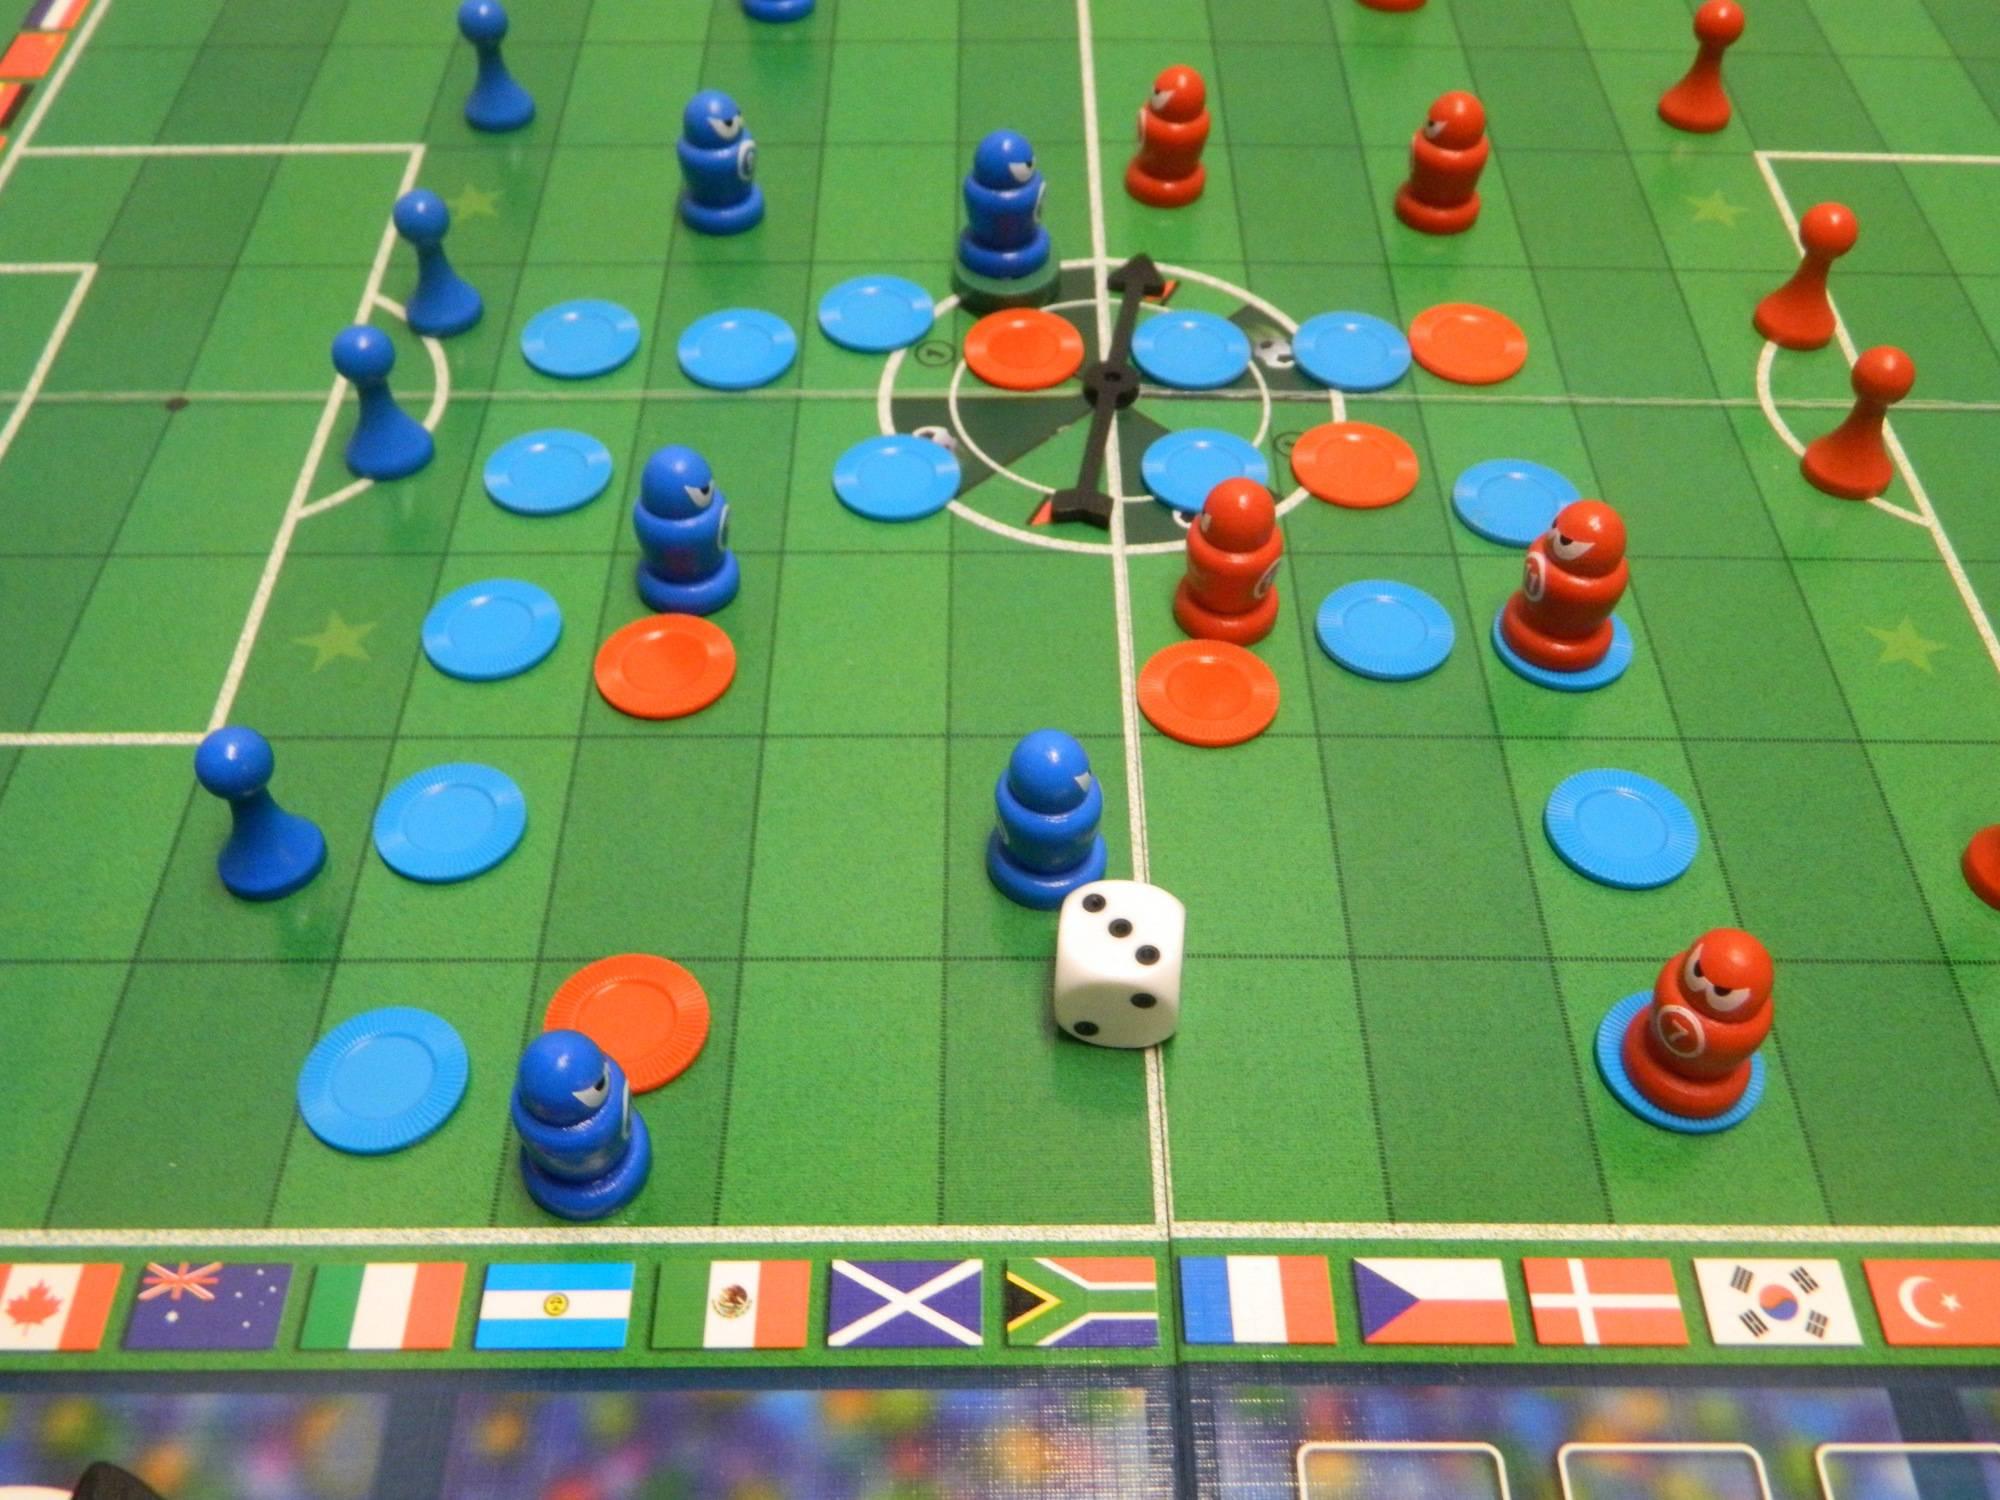 Soccer Tactics World Board Game Review and Rules - Geeky Hobbies